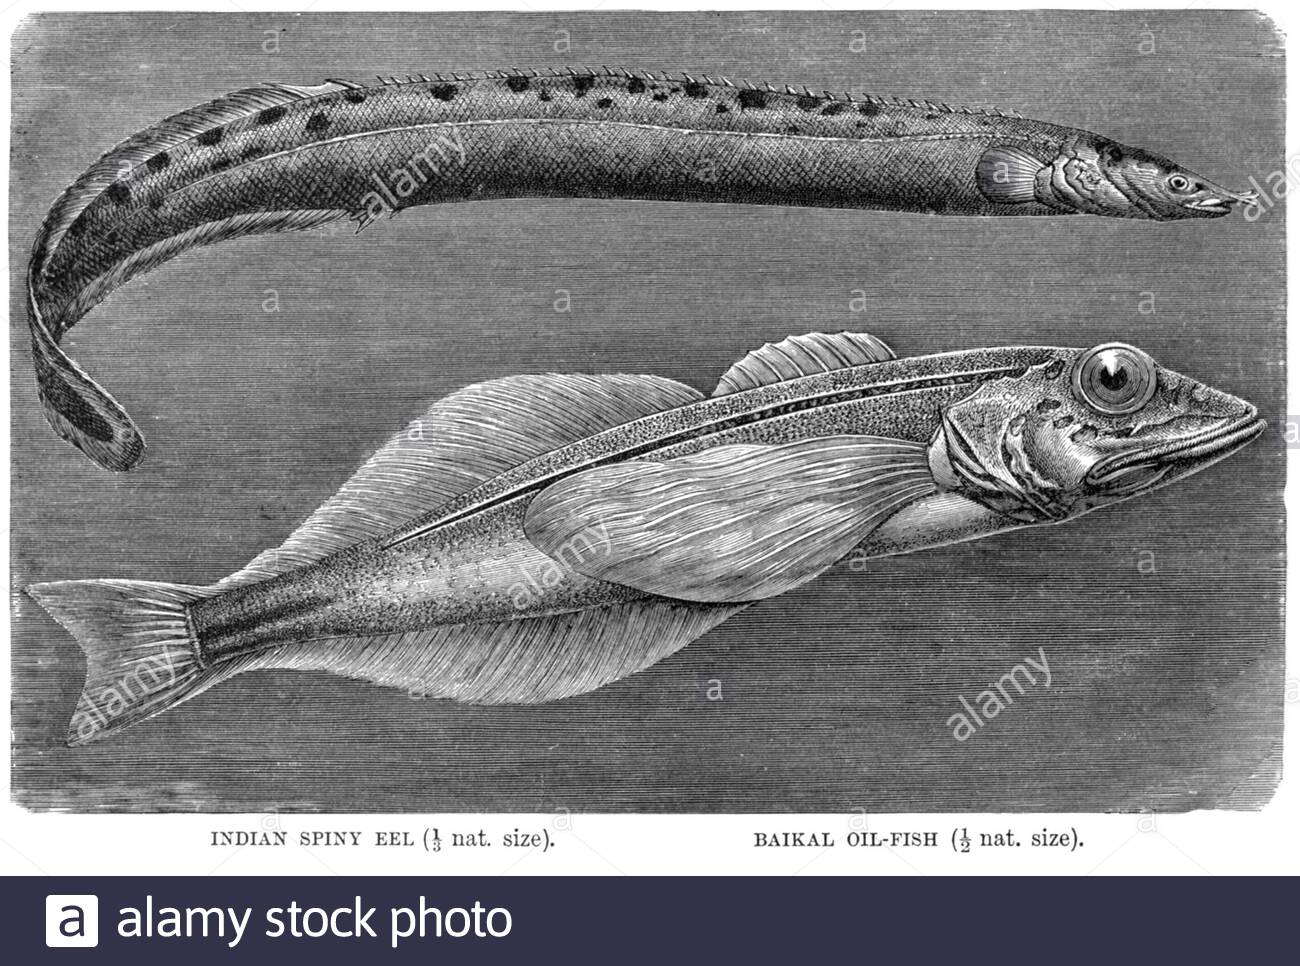 Indian Spiny Eel and Baikal Oil Fish, vintage illustration from 1896 Stock Photo